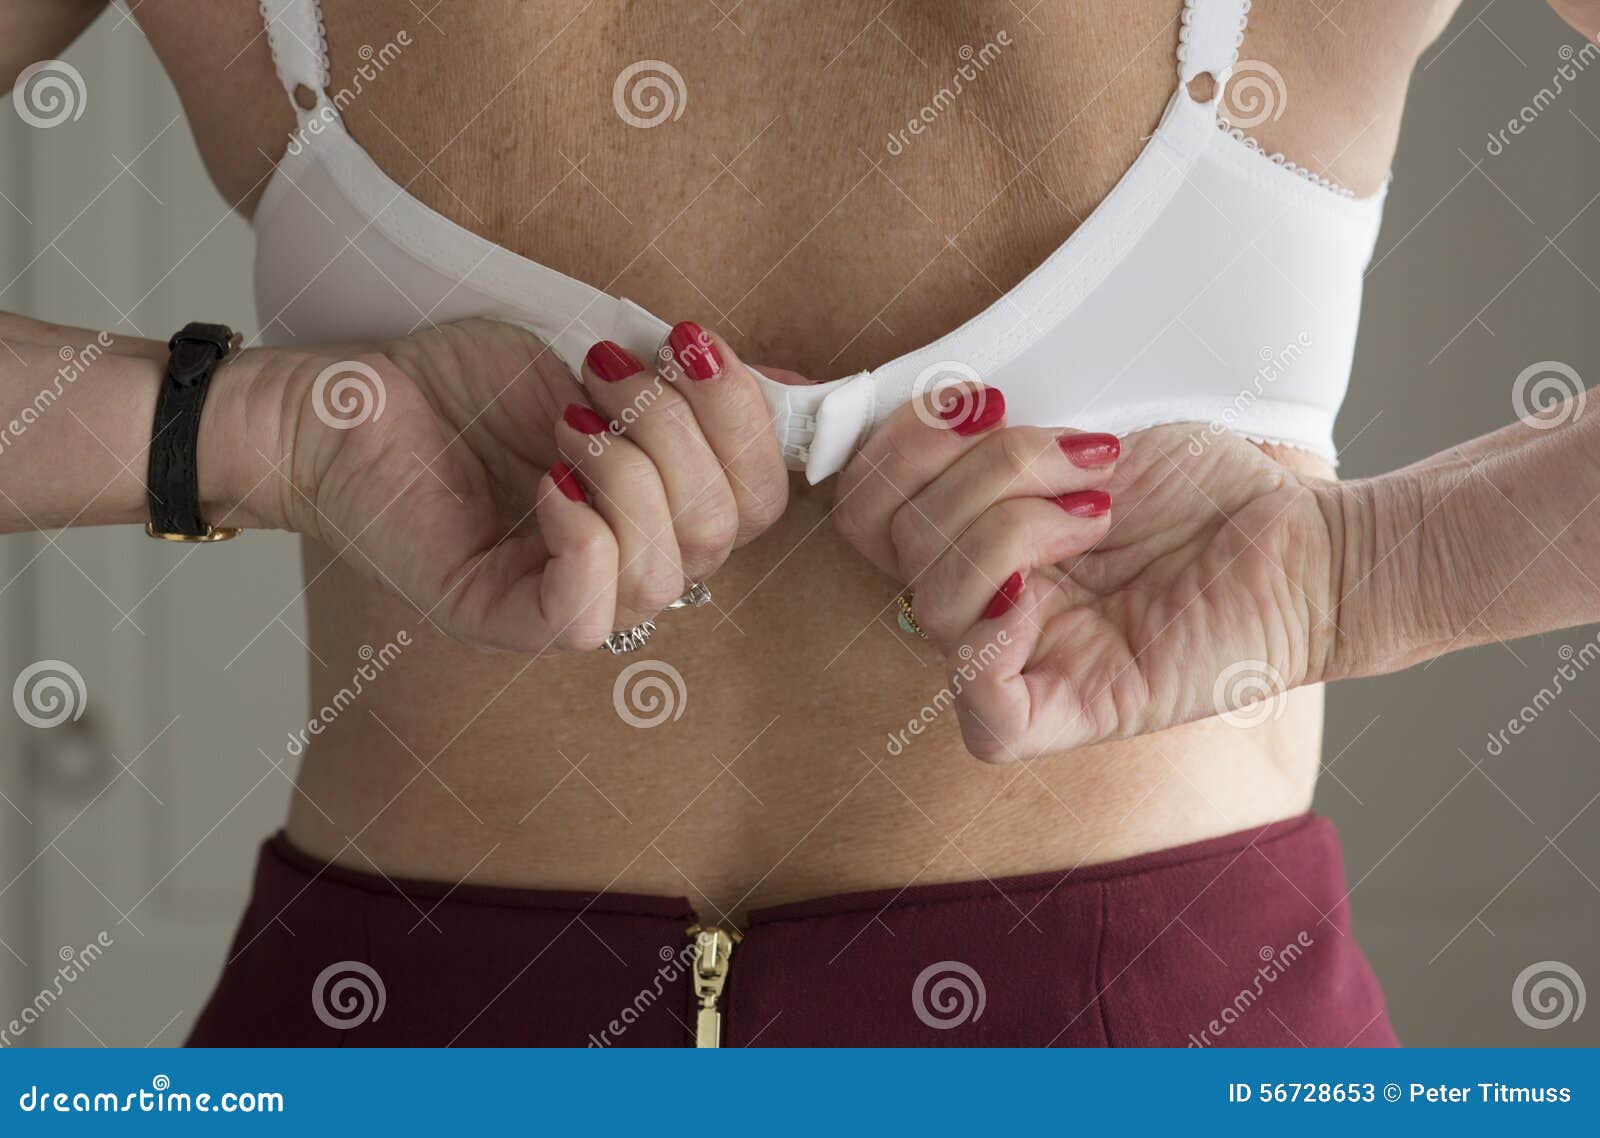 Fastening a woman s bra stock image. Image of woman, clip - 56728653